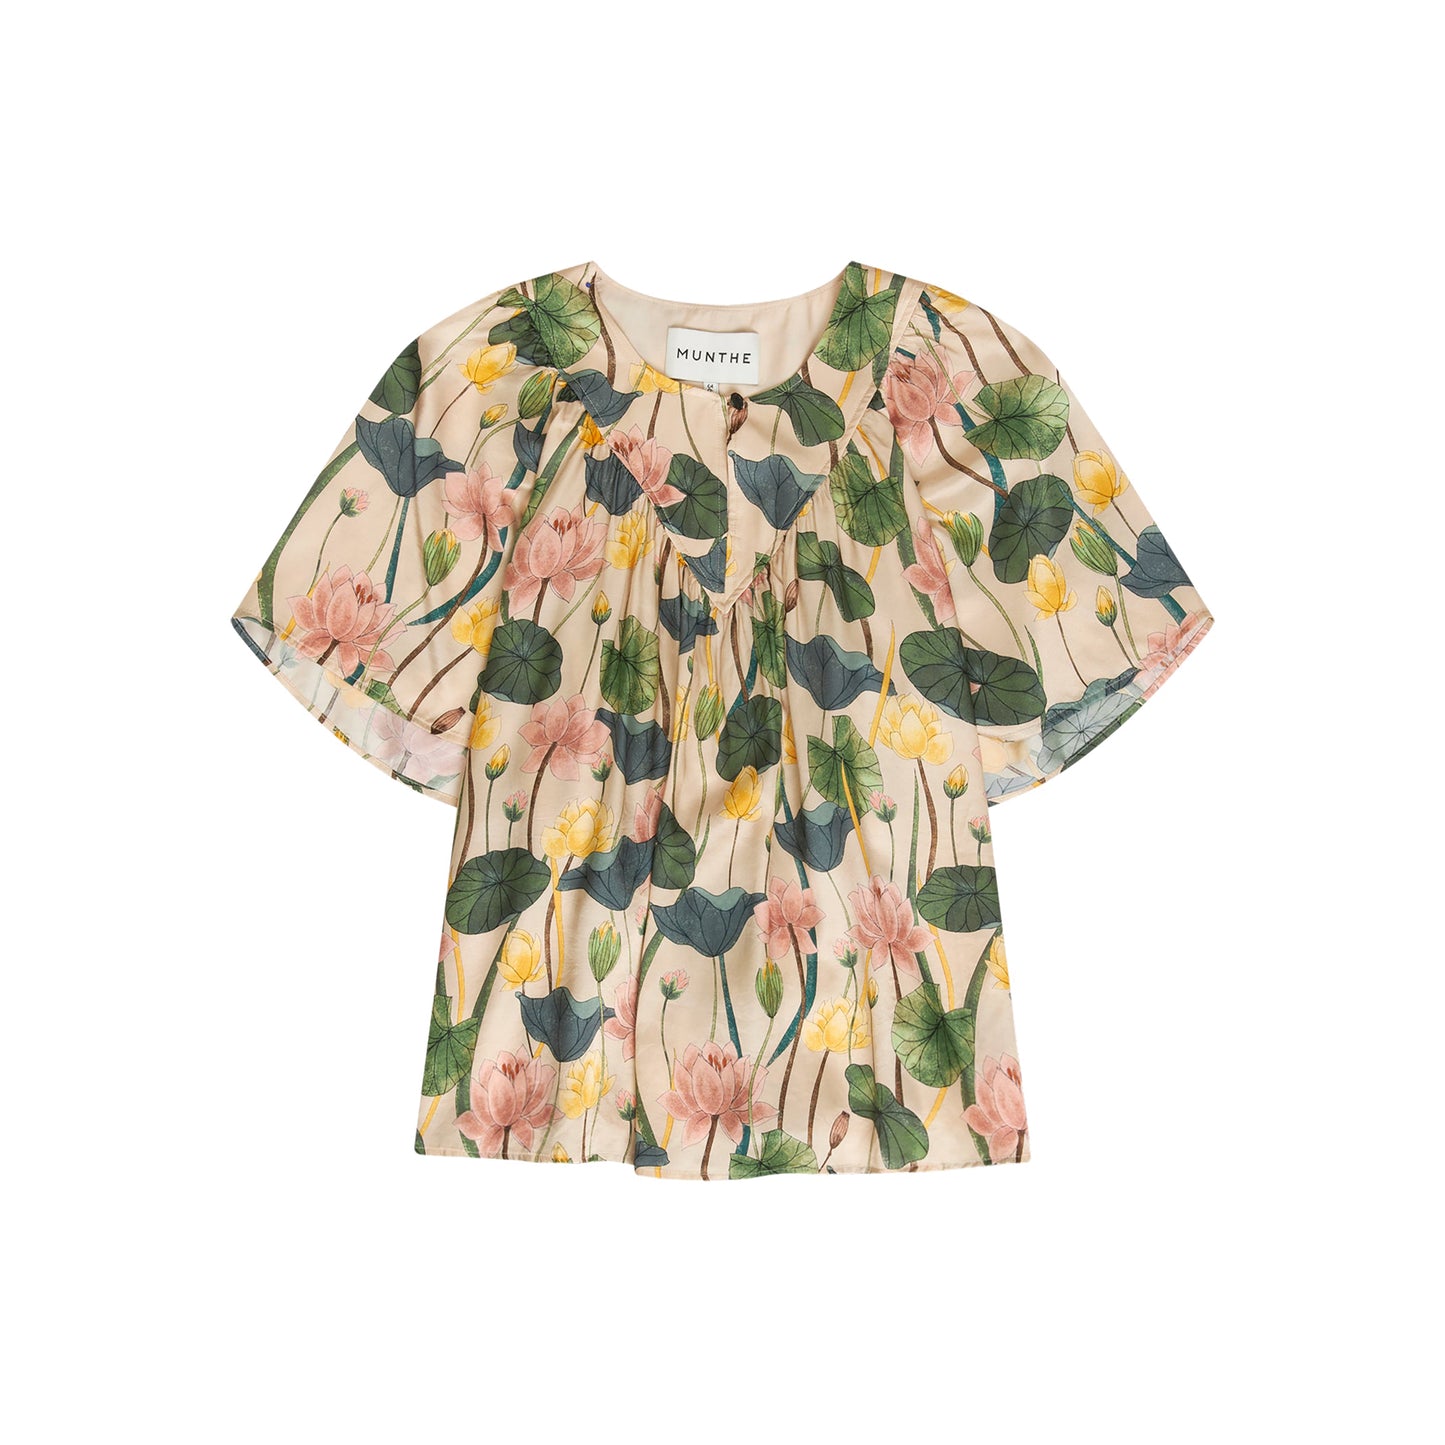 Kaige Printed Blouse in Dusty Green